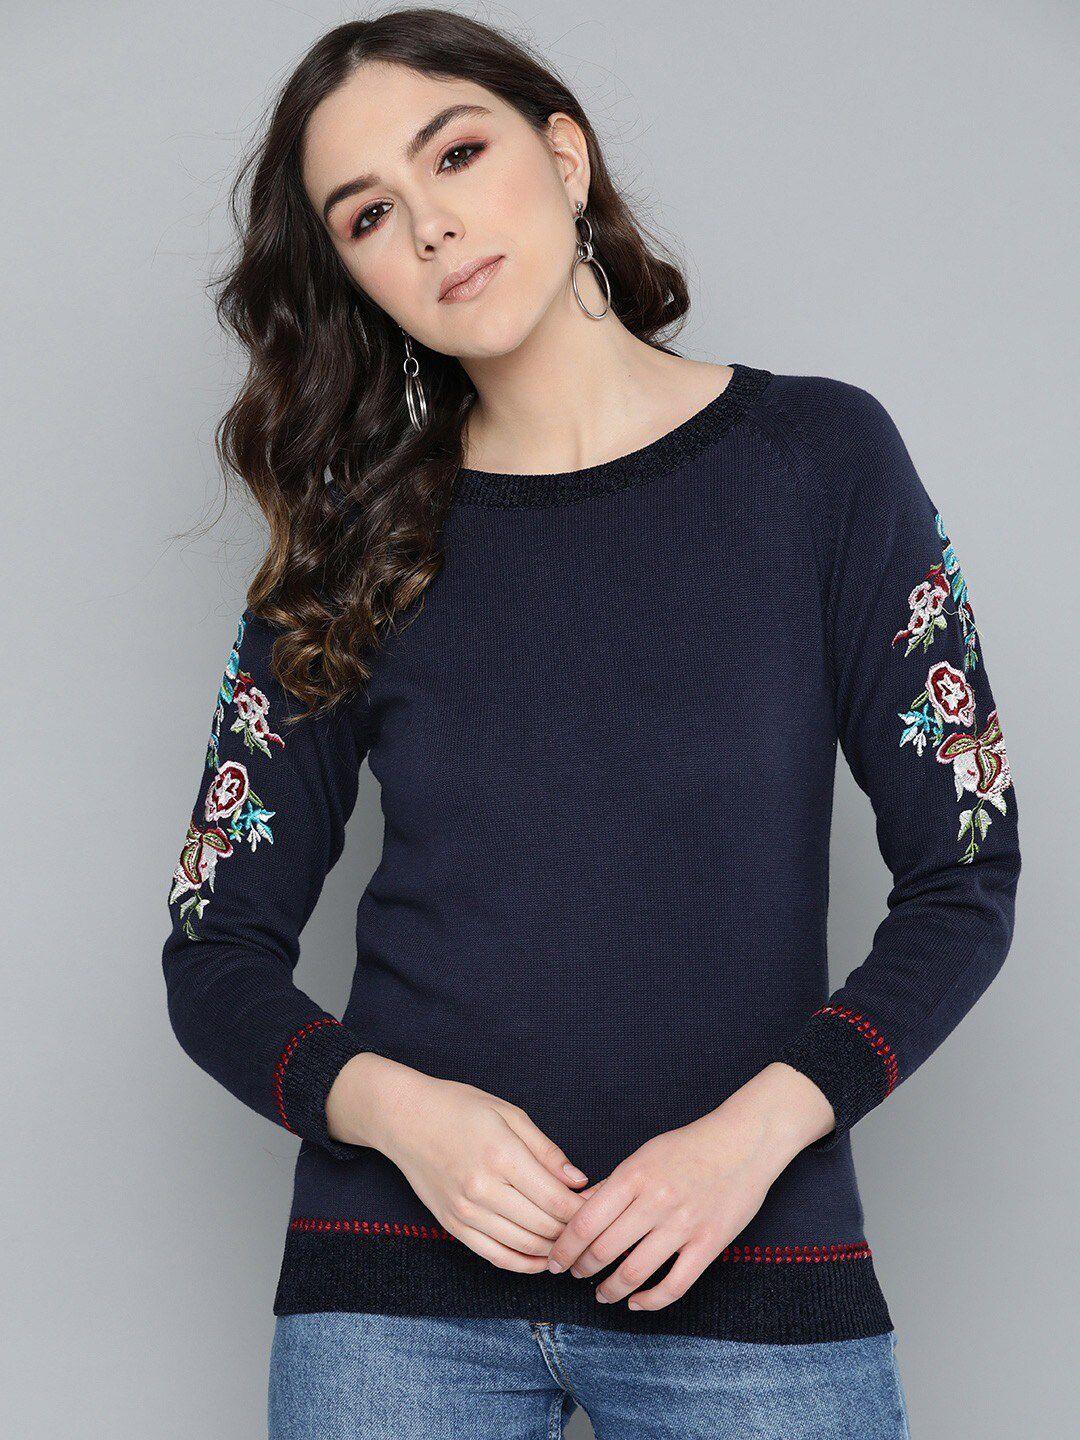 carlton-london-women-navy-blue-&-red-floral-pullover-with-embroidered-detail